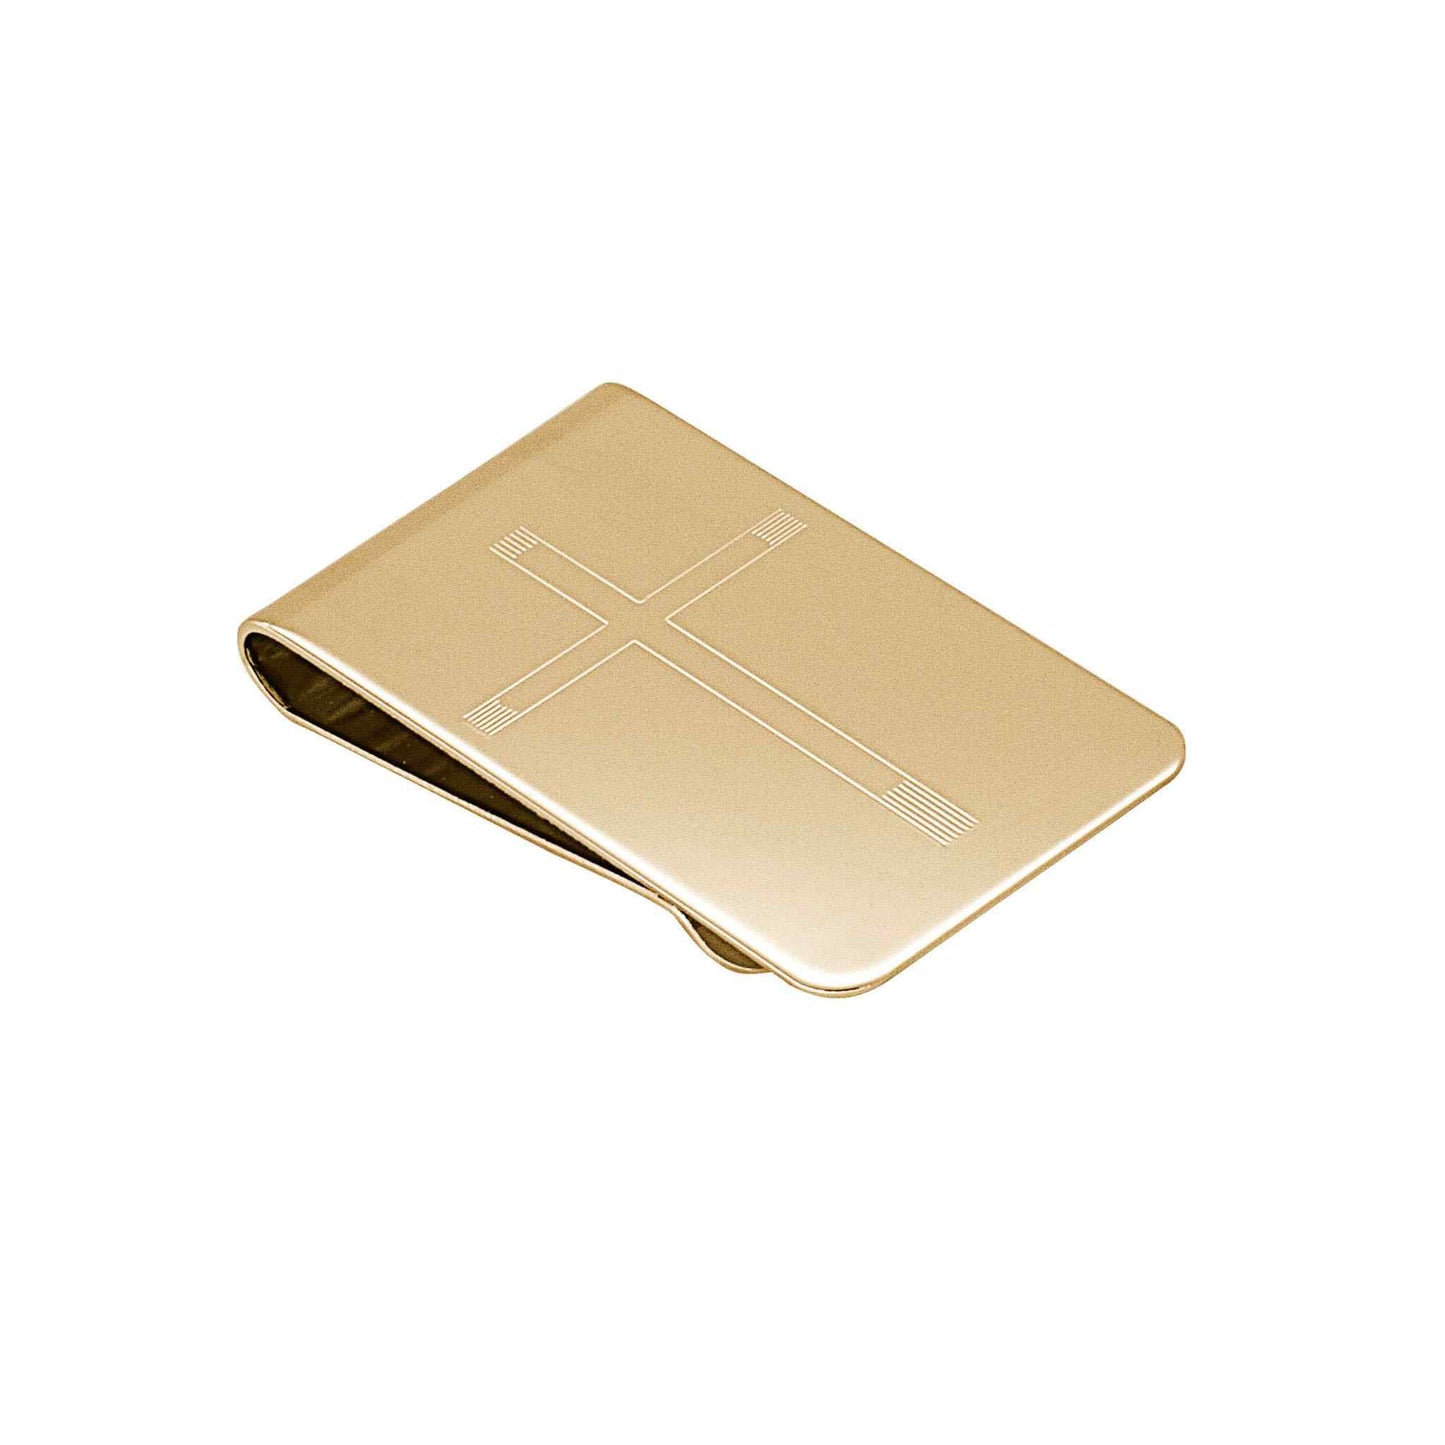 A cross money clip displayed on a neutral white background.